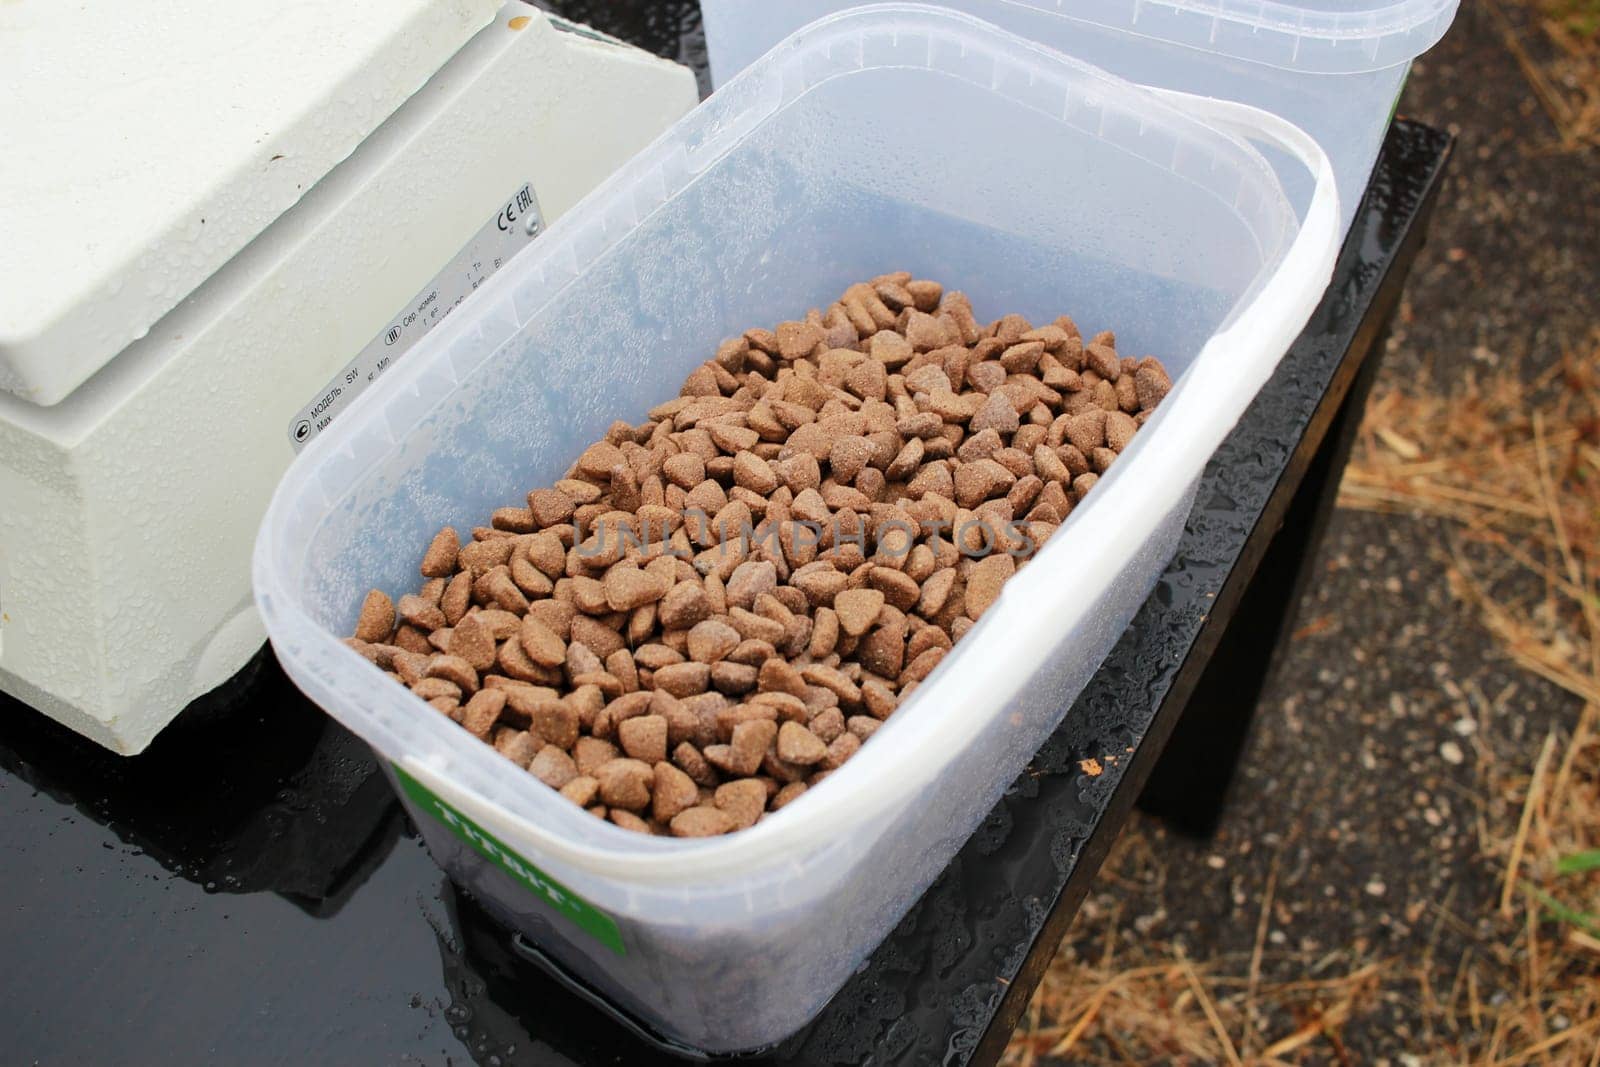 Photo dry dog food and scales. Weighing the feed. Dog food.